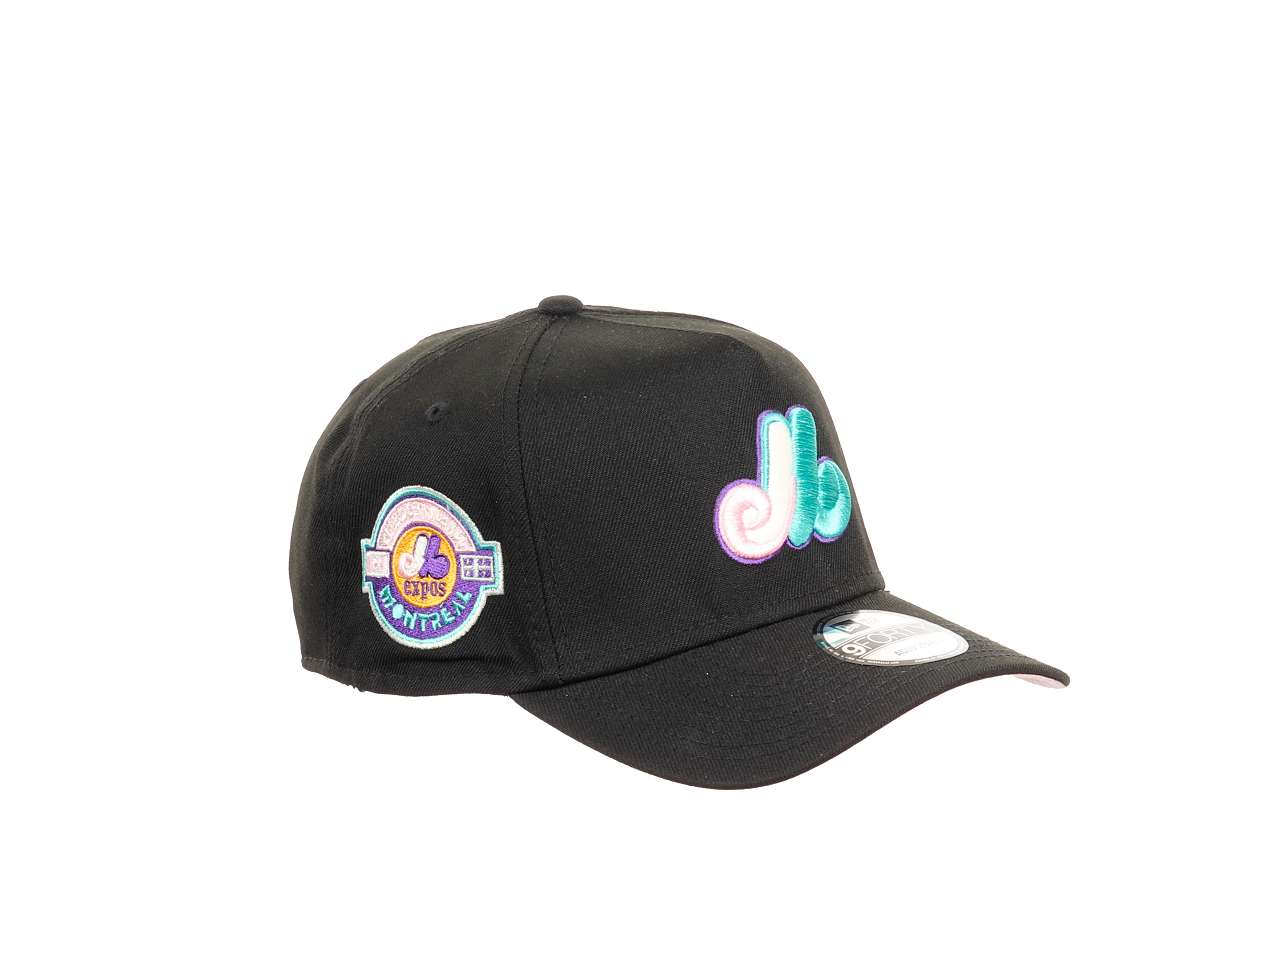 Montreal Expos MLB Expos Baseball Club  Sidepatch Black 9Forty A-Frame Snapback Cap New Era